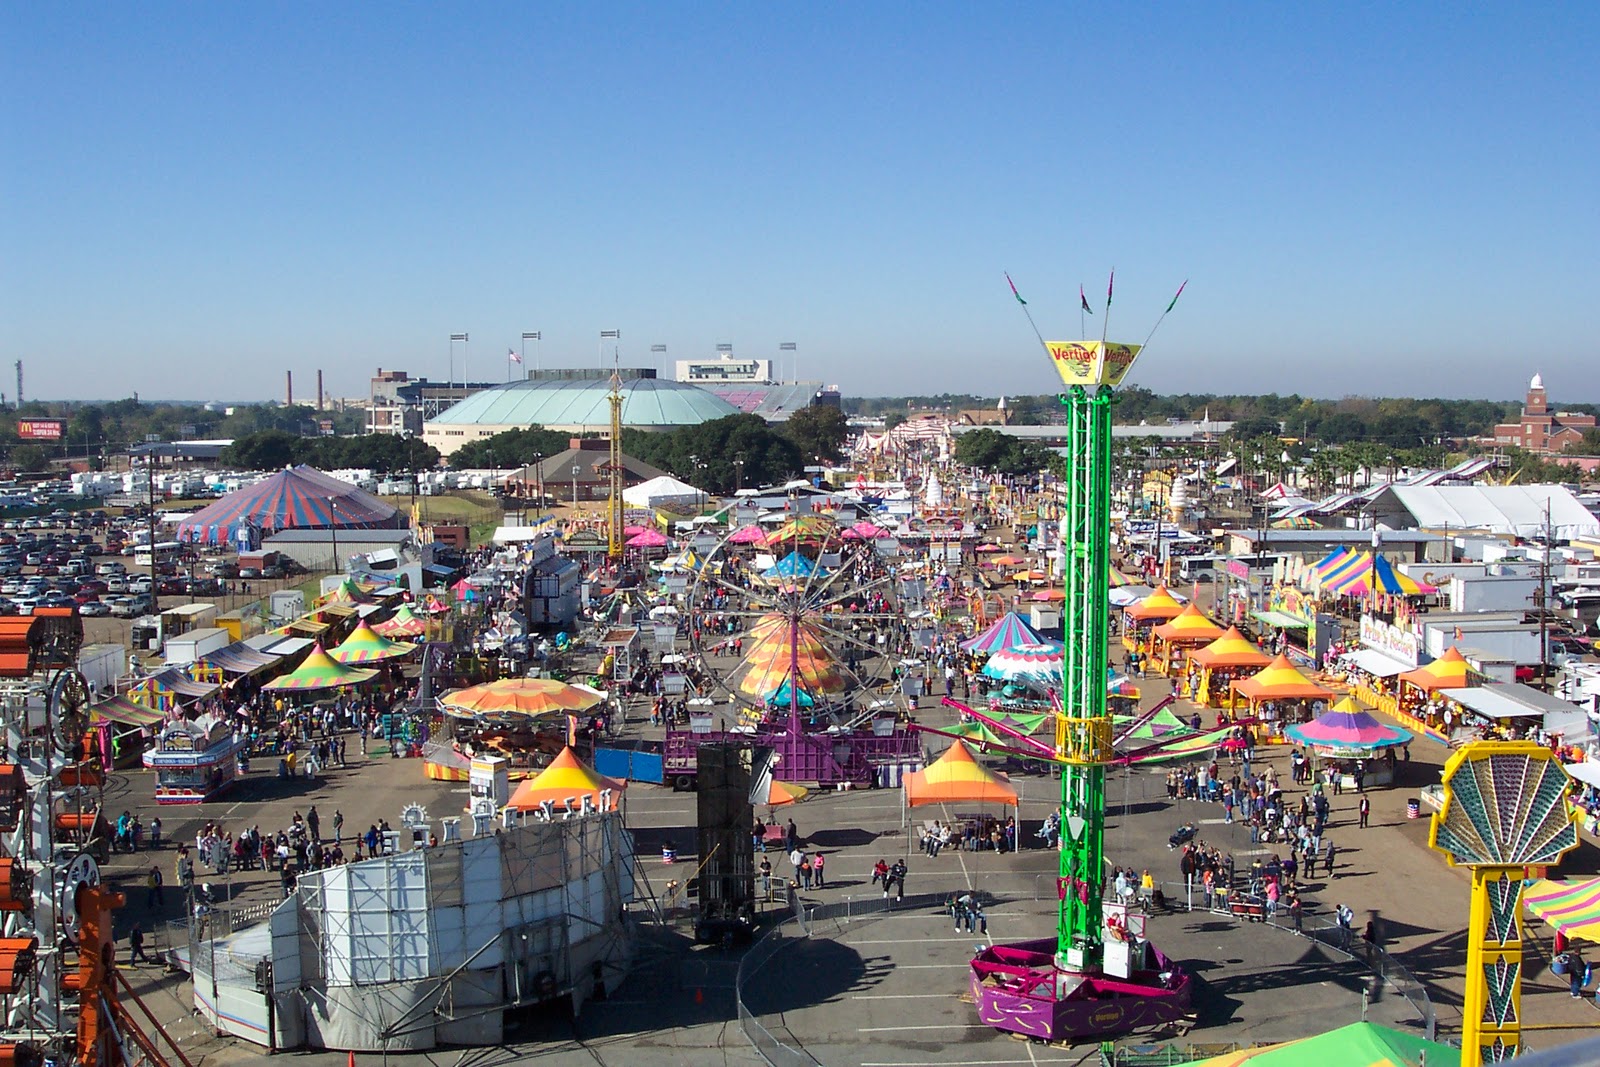 ANDY&#39;S PLACE...: So, how much does it cost to go the State Fair for &quot;free?&quot;